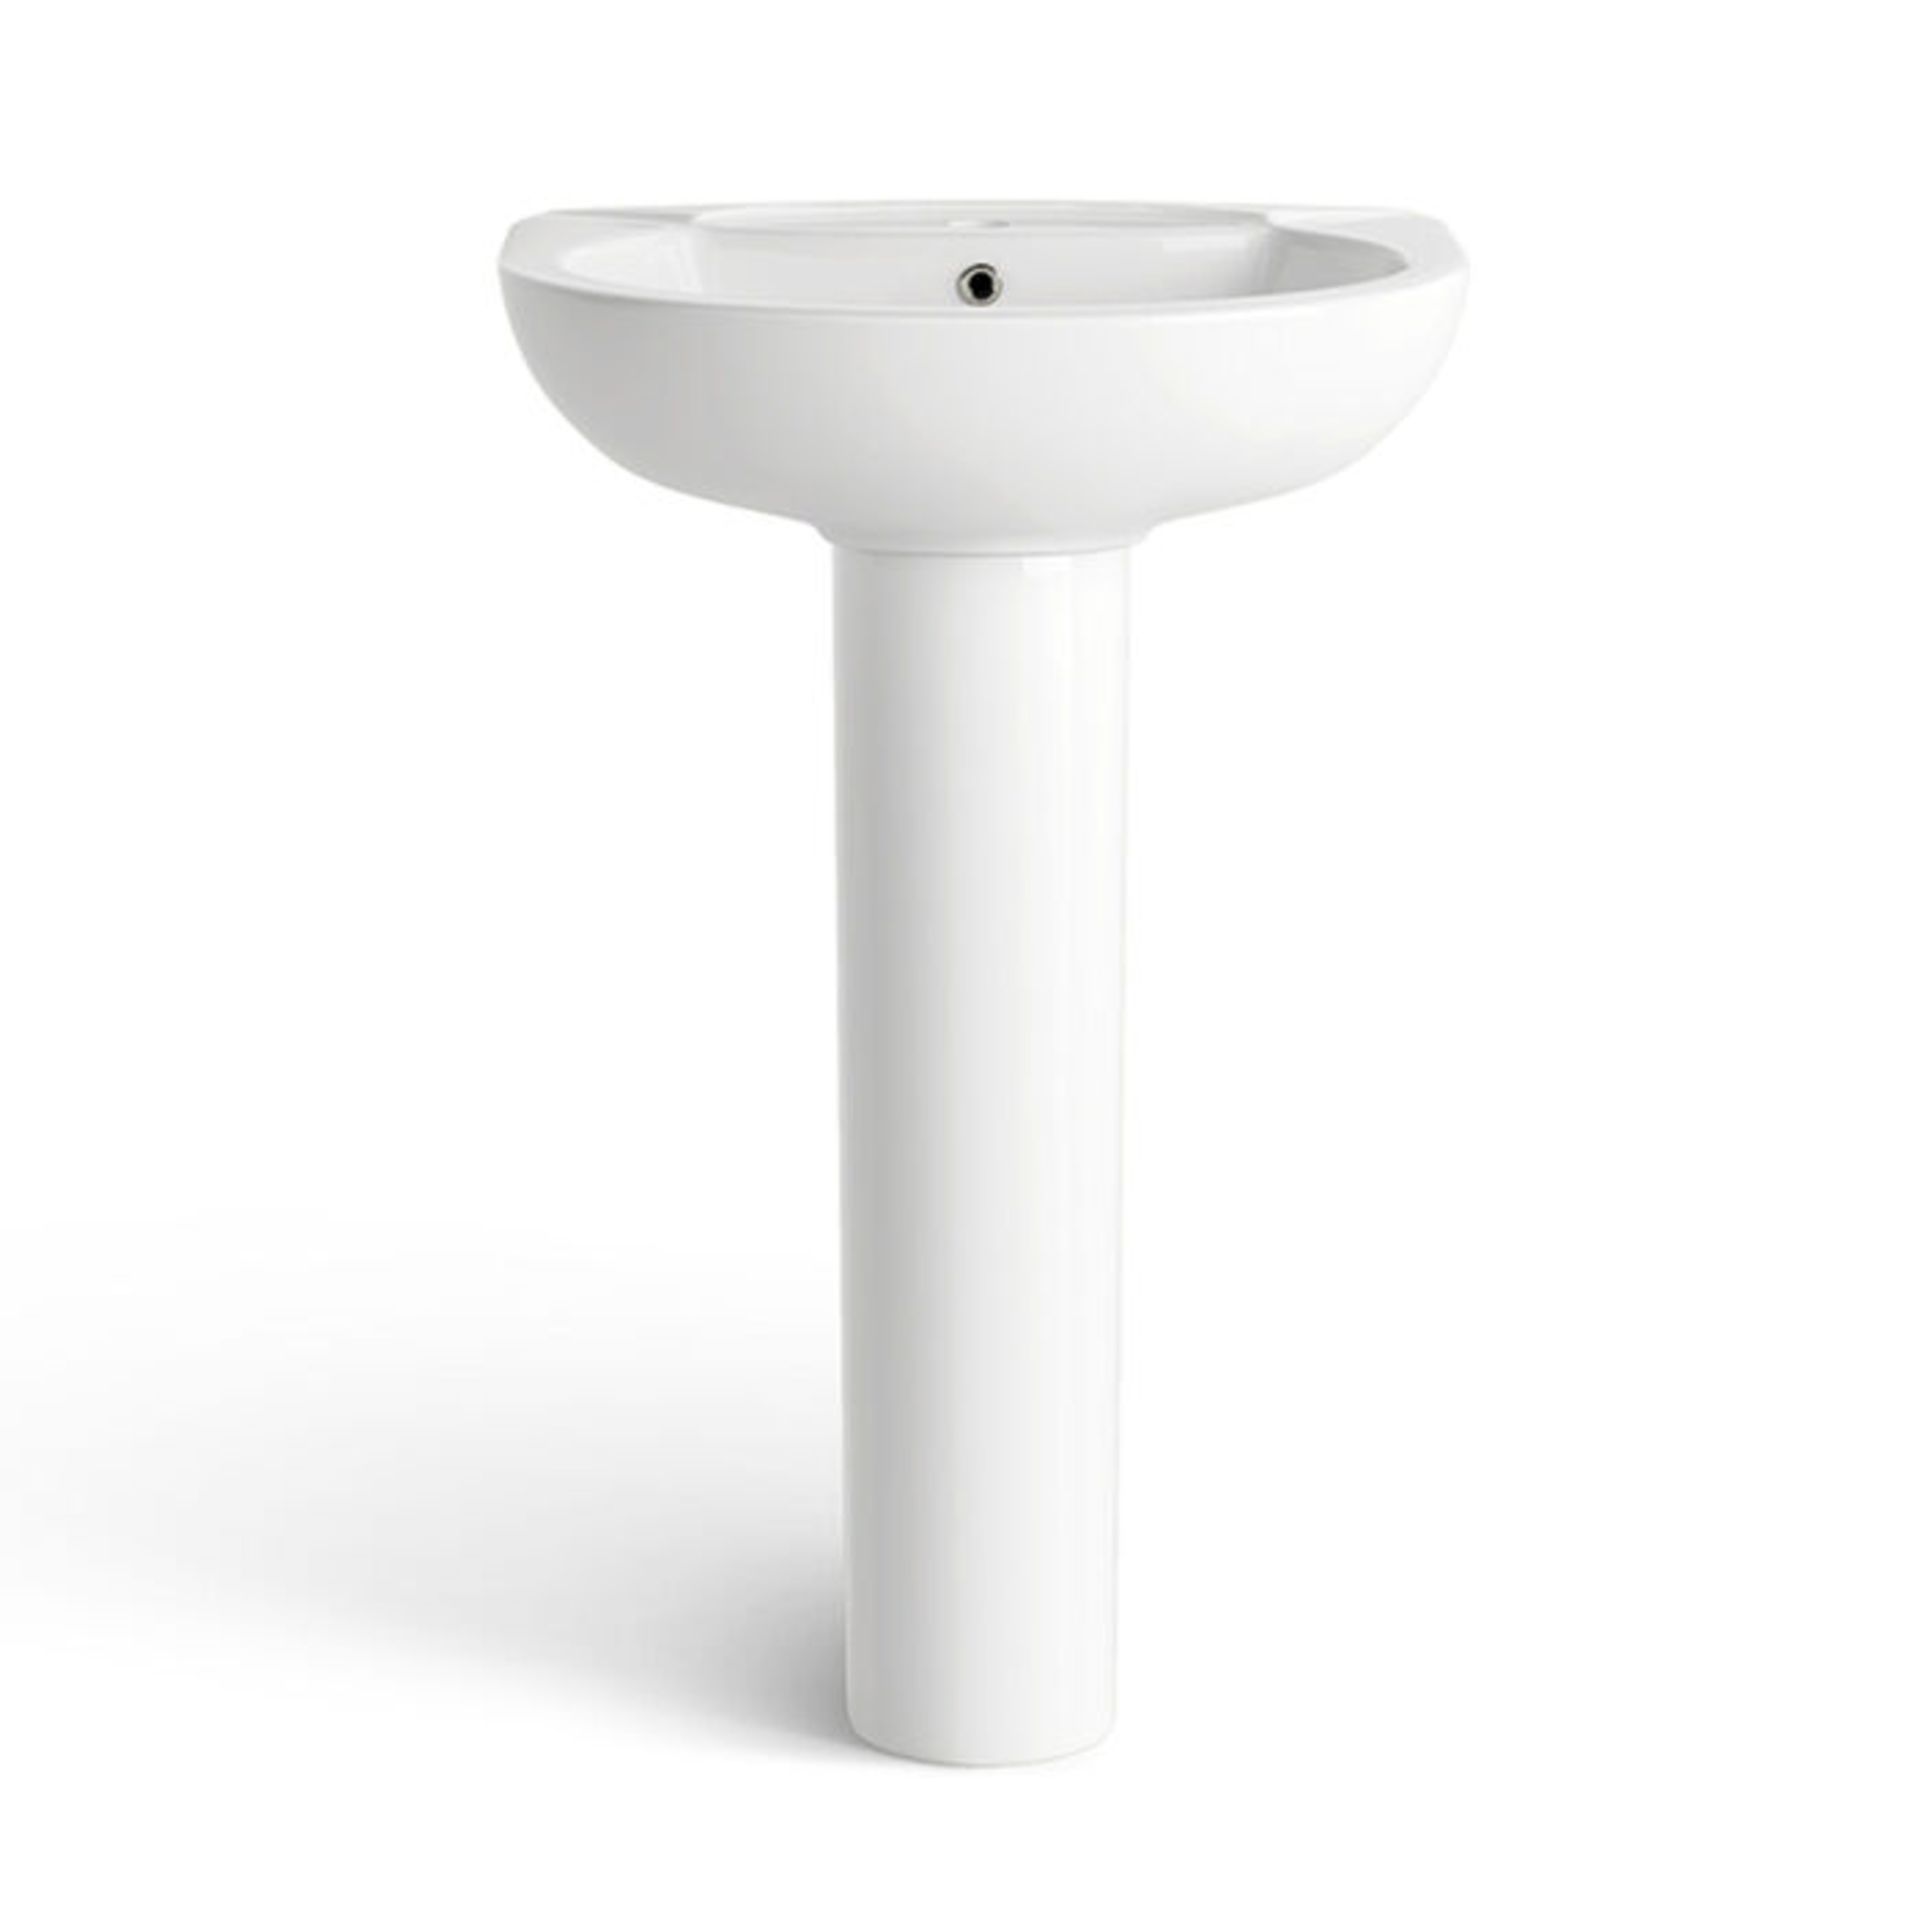 Sink & Pedestal - Single Tap Hole. Made from White Vitreous China and finished with a high glos... - Image 2 of 3